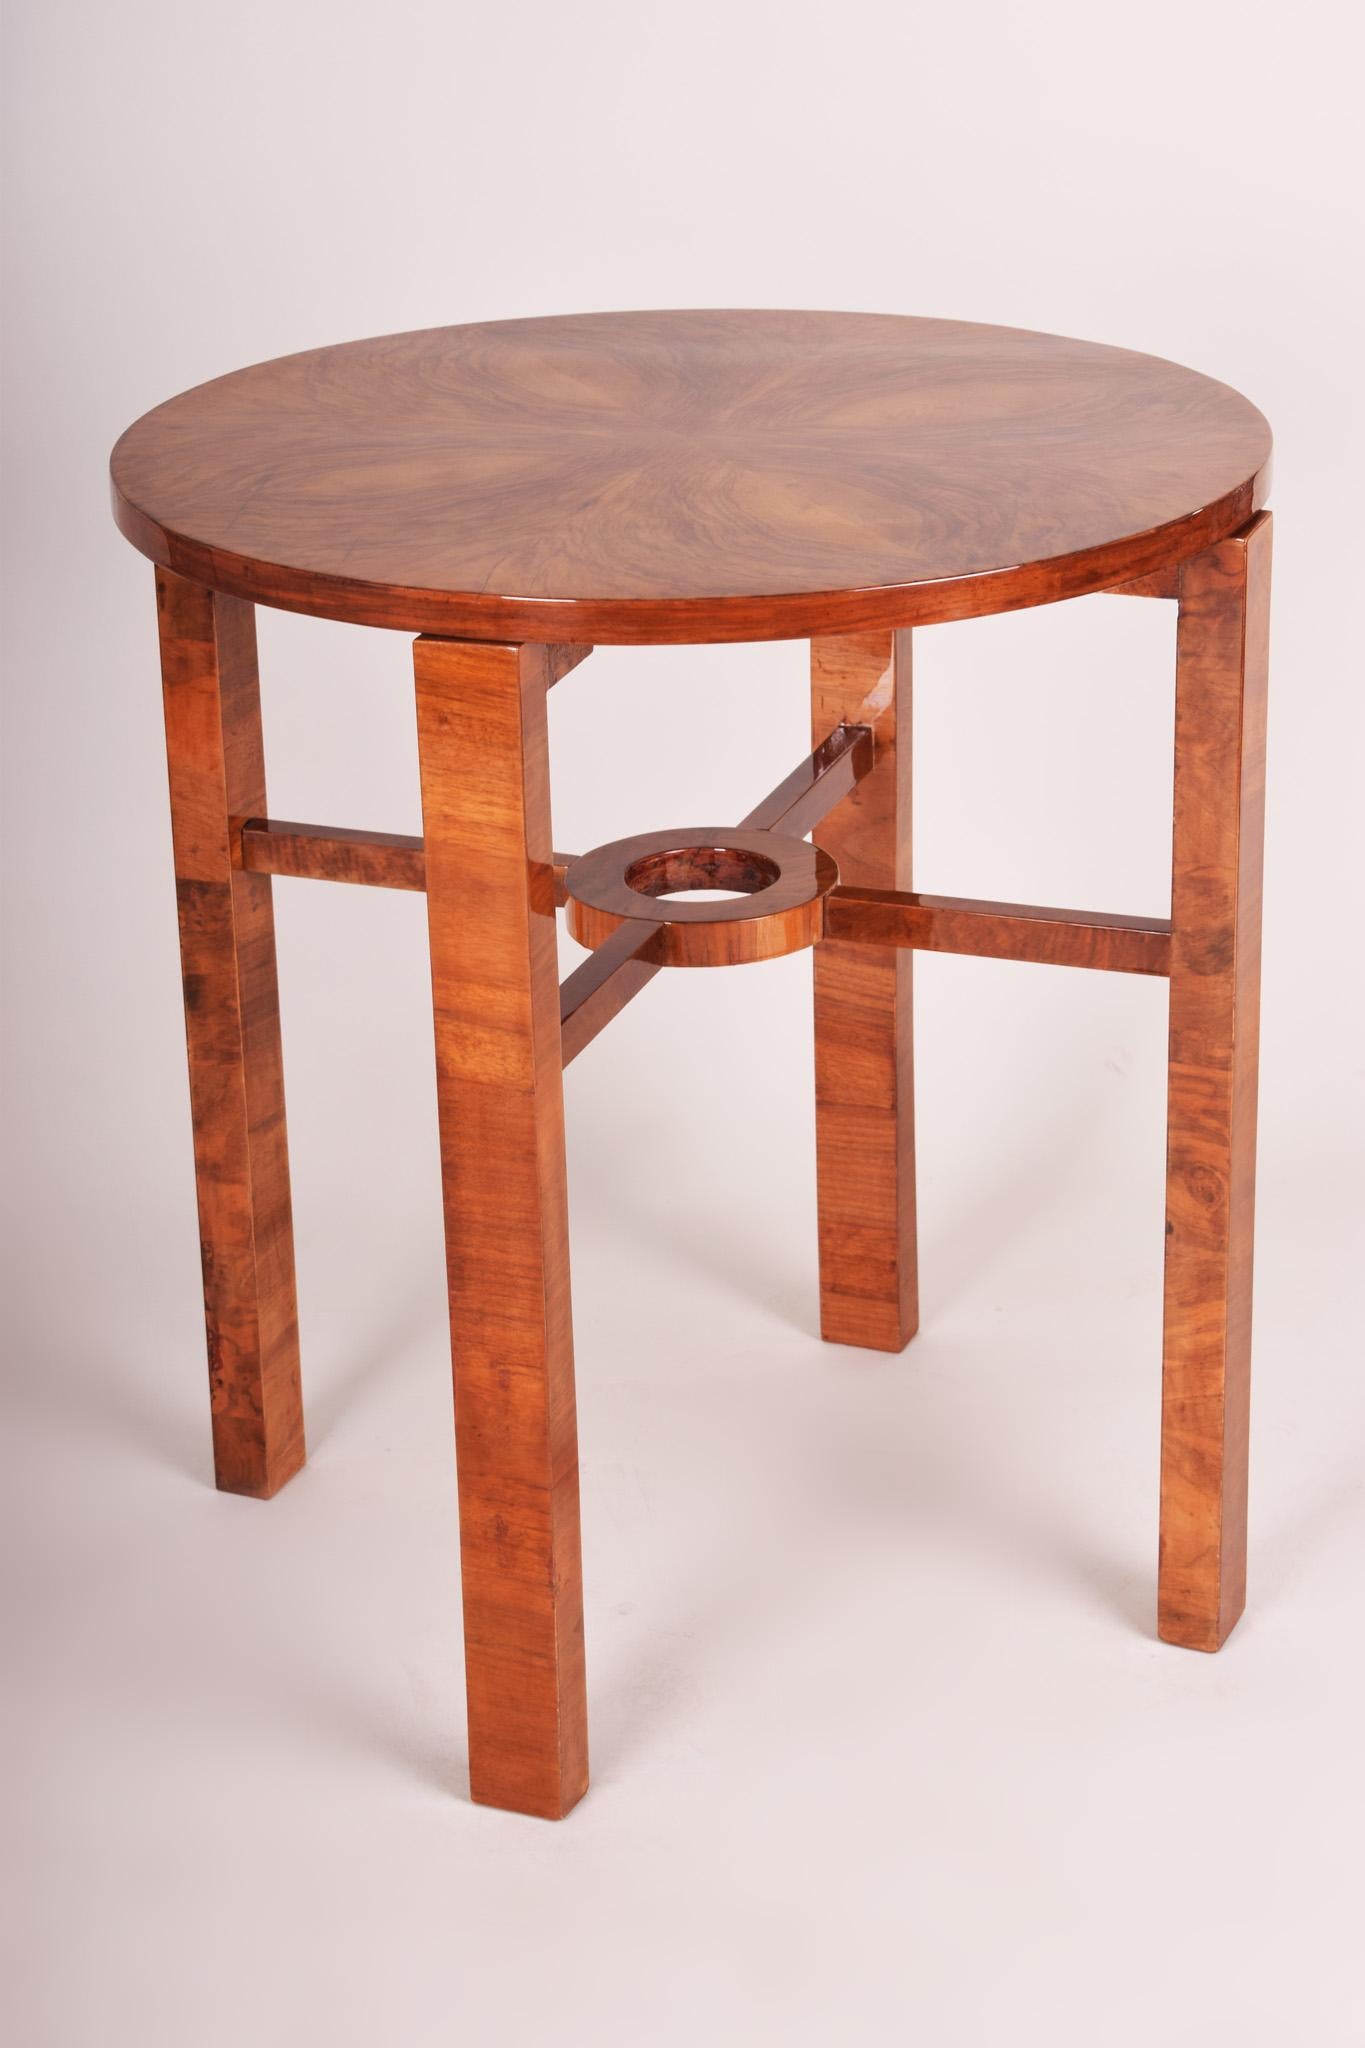 Small German Art Deco Table, 1930s, Walnut, Fully Restored For Sale at  1stDibs